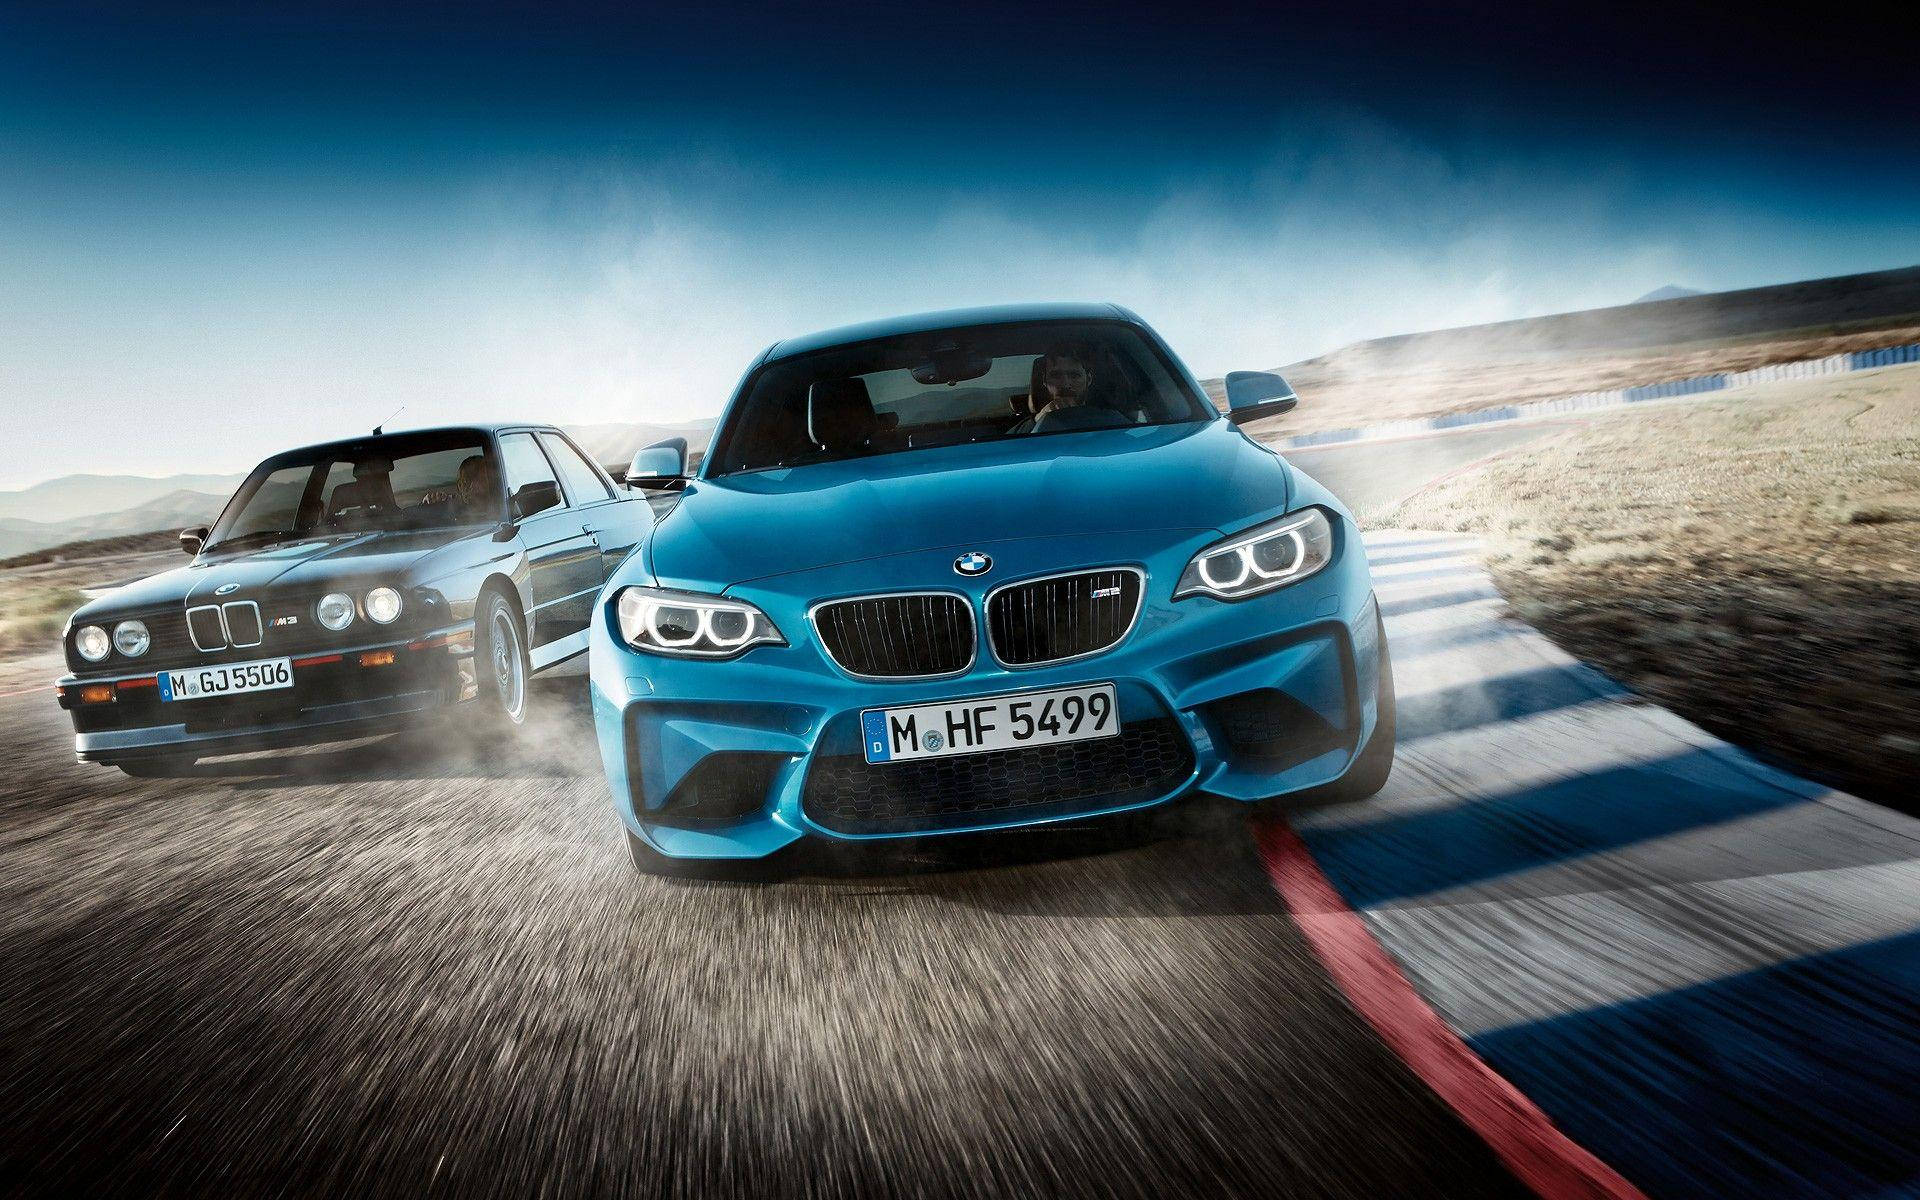 Blue Bmw Cars On Race Track Background